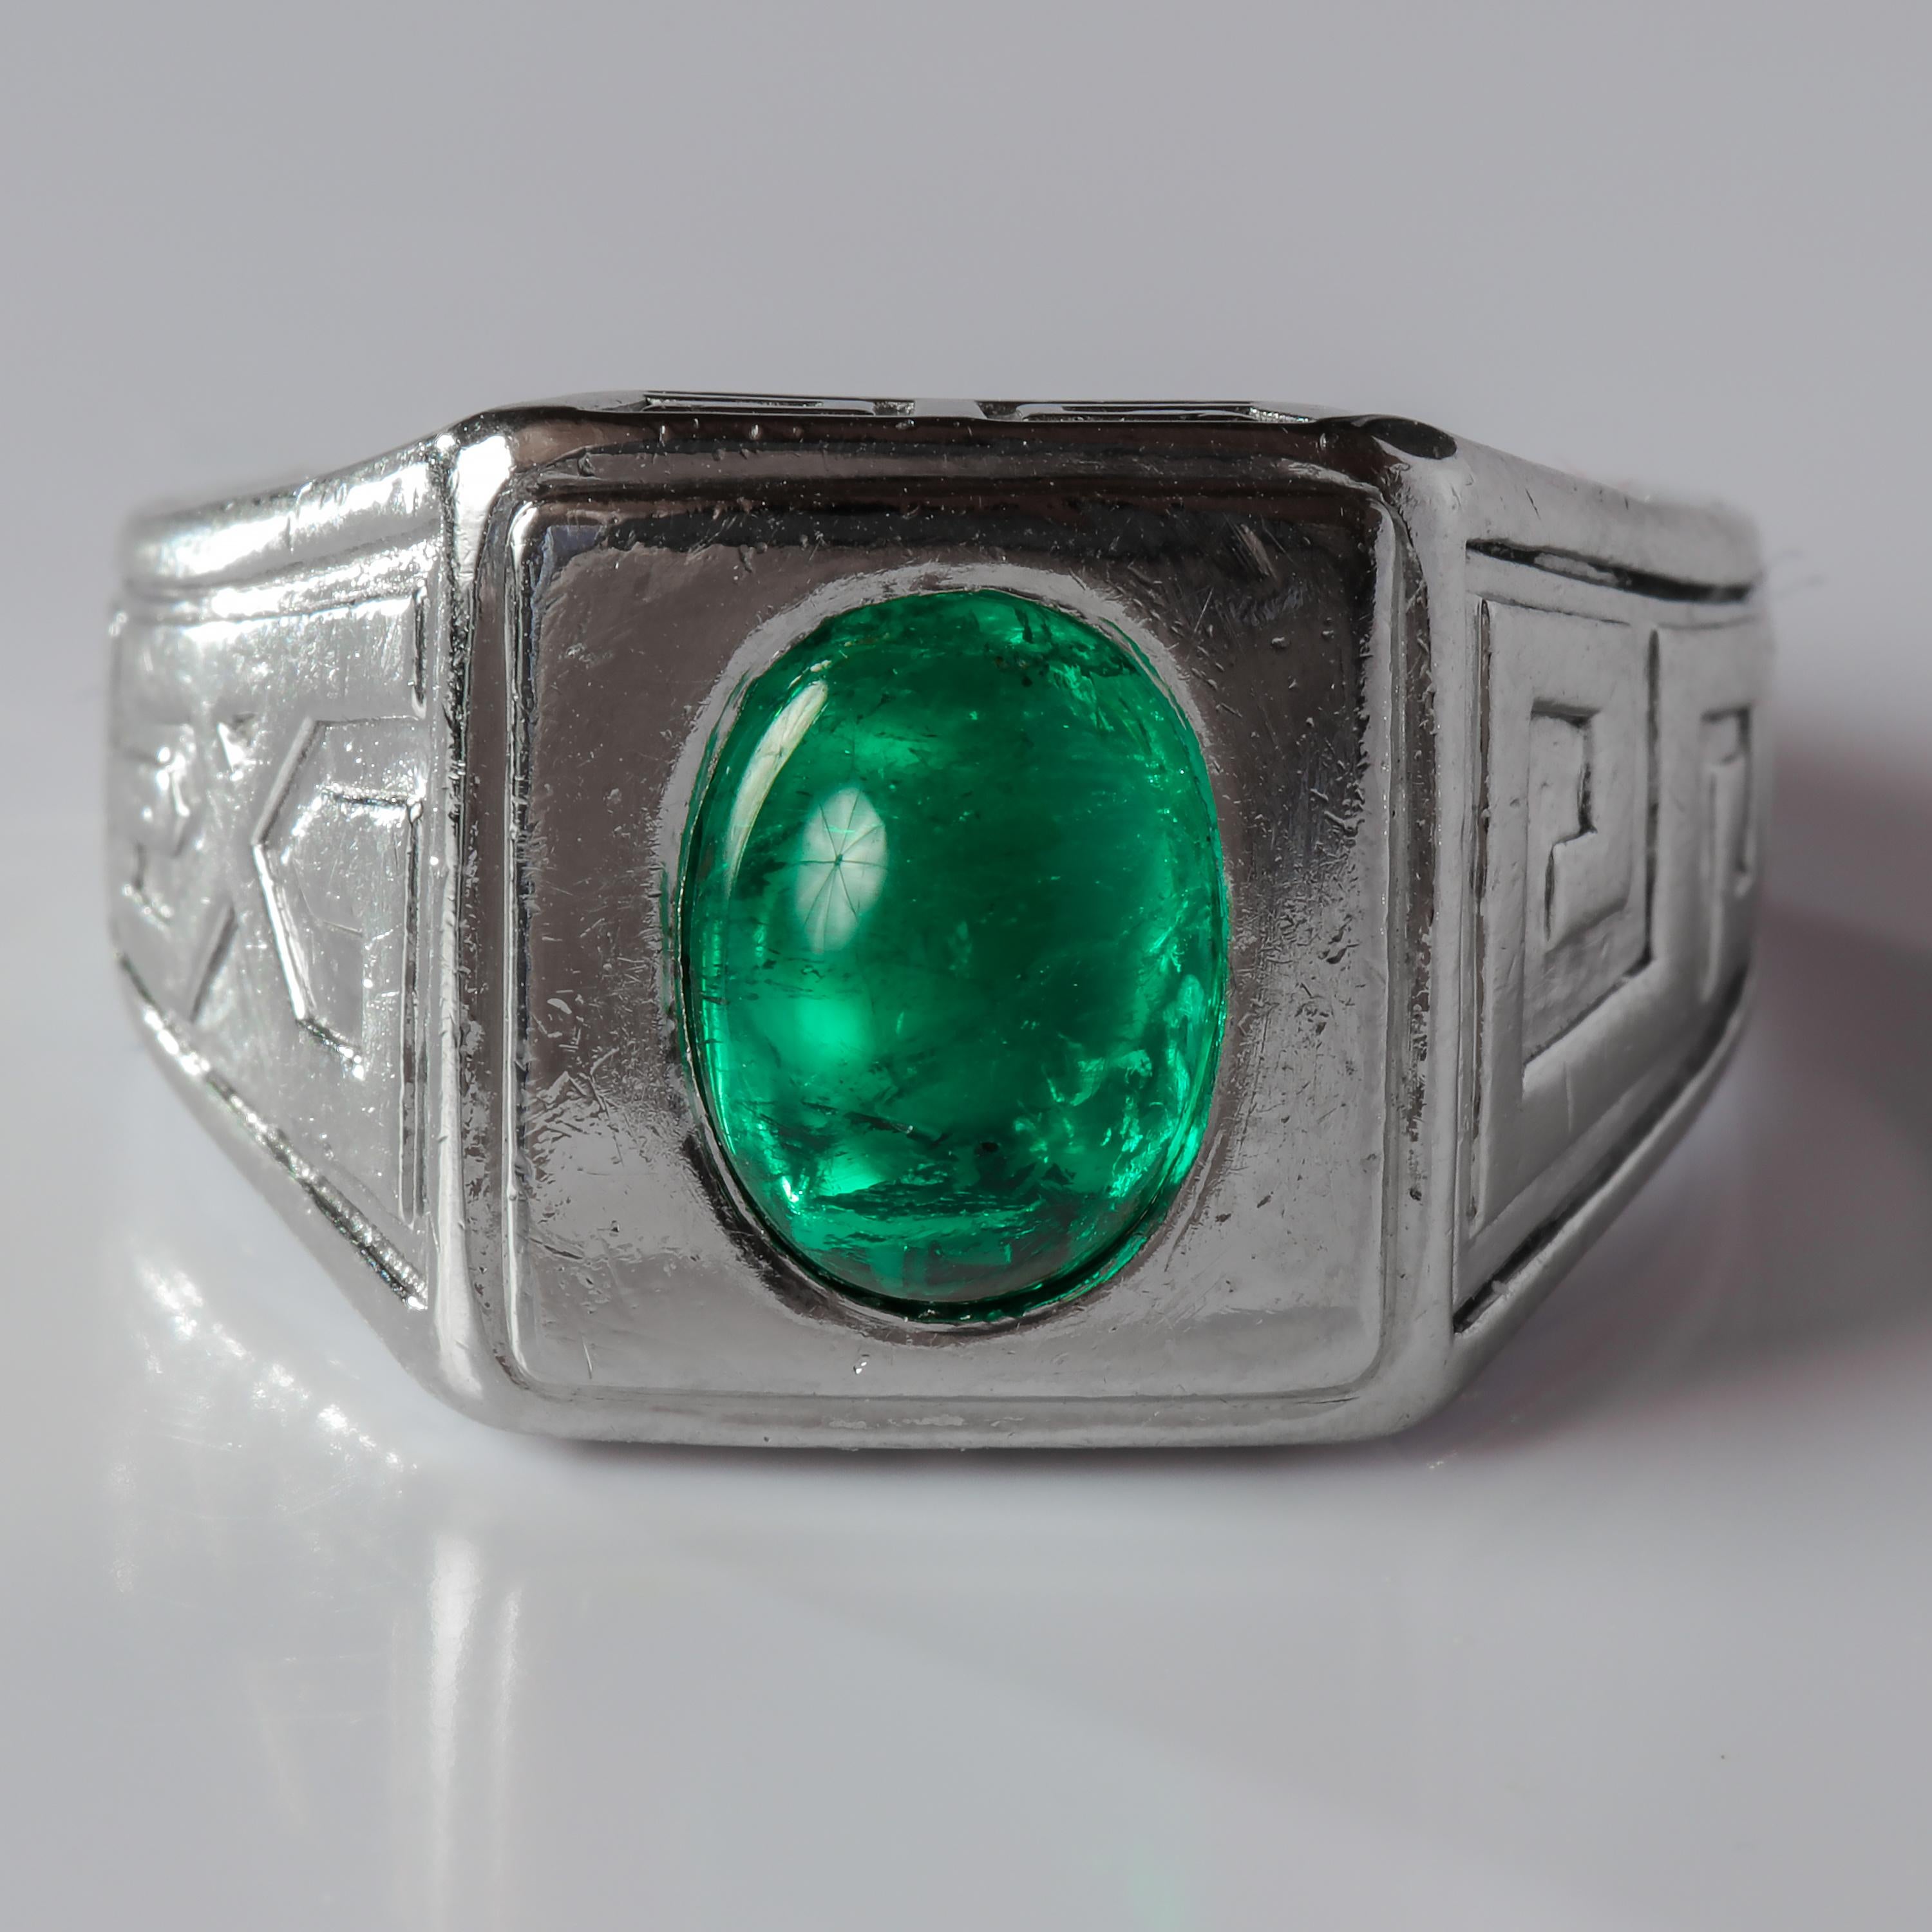 The emerald in this ring. I can't even. It's an 8.7mm x 6.5mm x 4.9mm cabochon-cut two-carat gem from Colombia, almost certainly from their legendary Muzo mines. The color is a richly saturated bluish-green —stunning. Quite literally emerald's